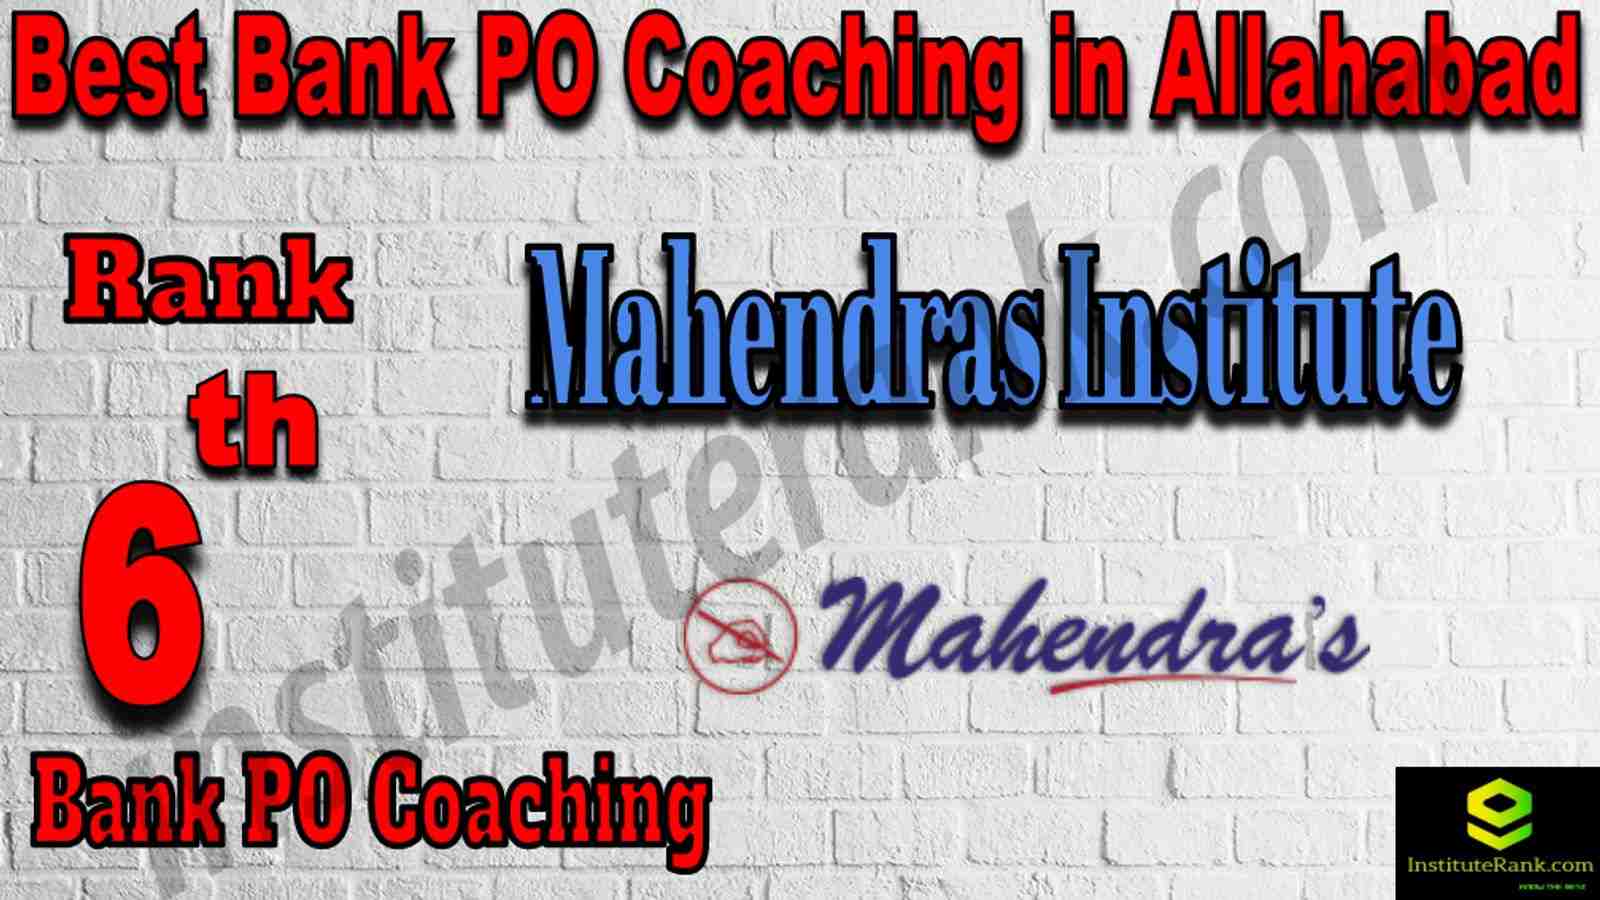 6th Best Bank PO Coaching in Allahabad